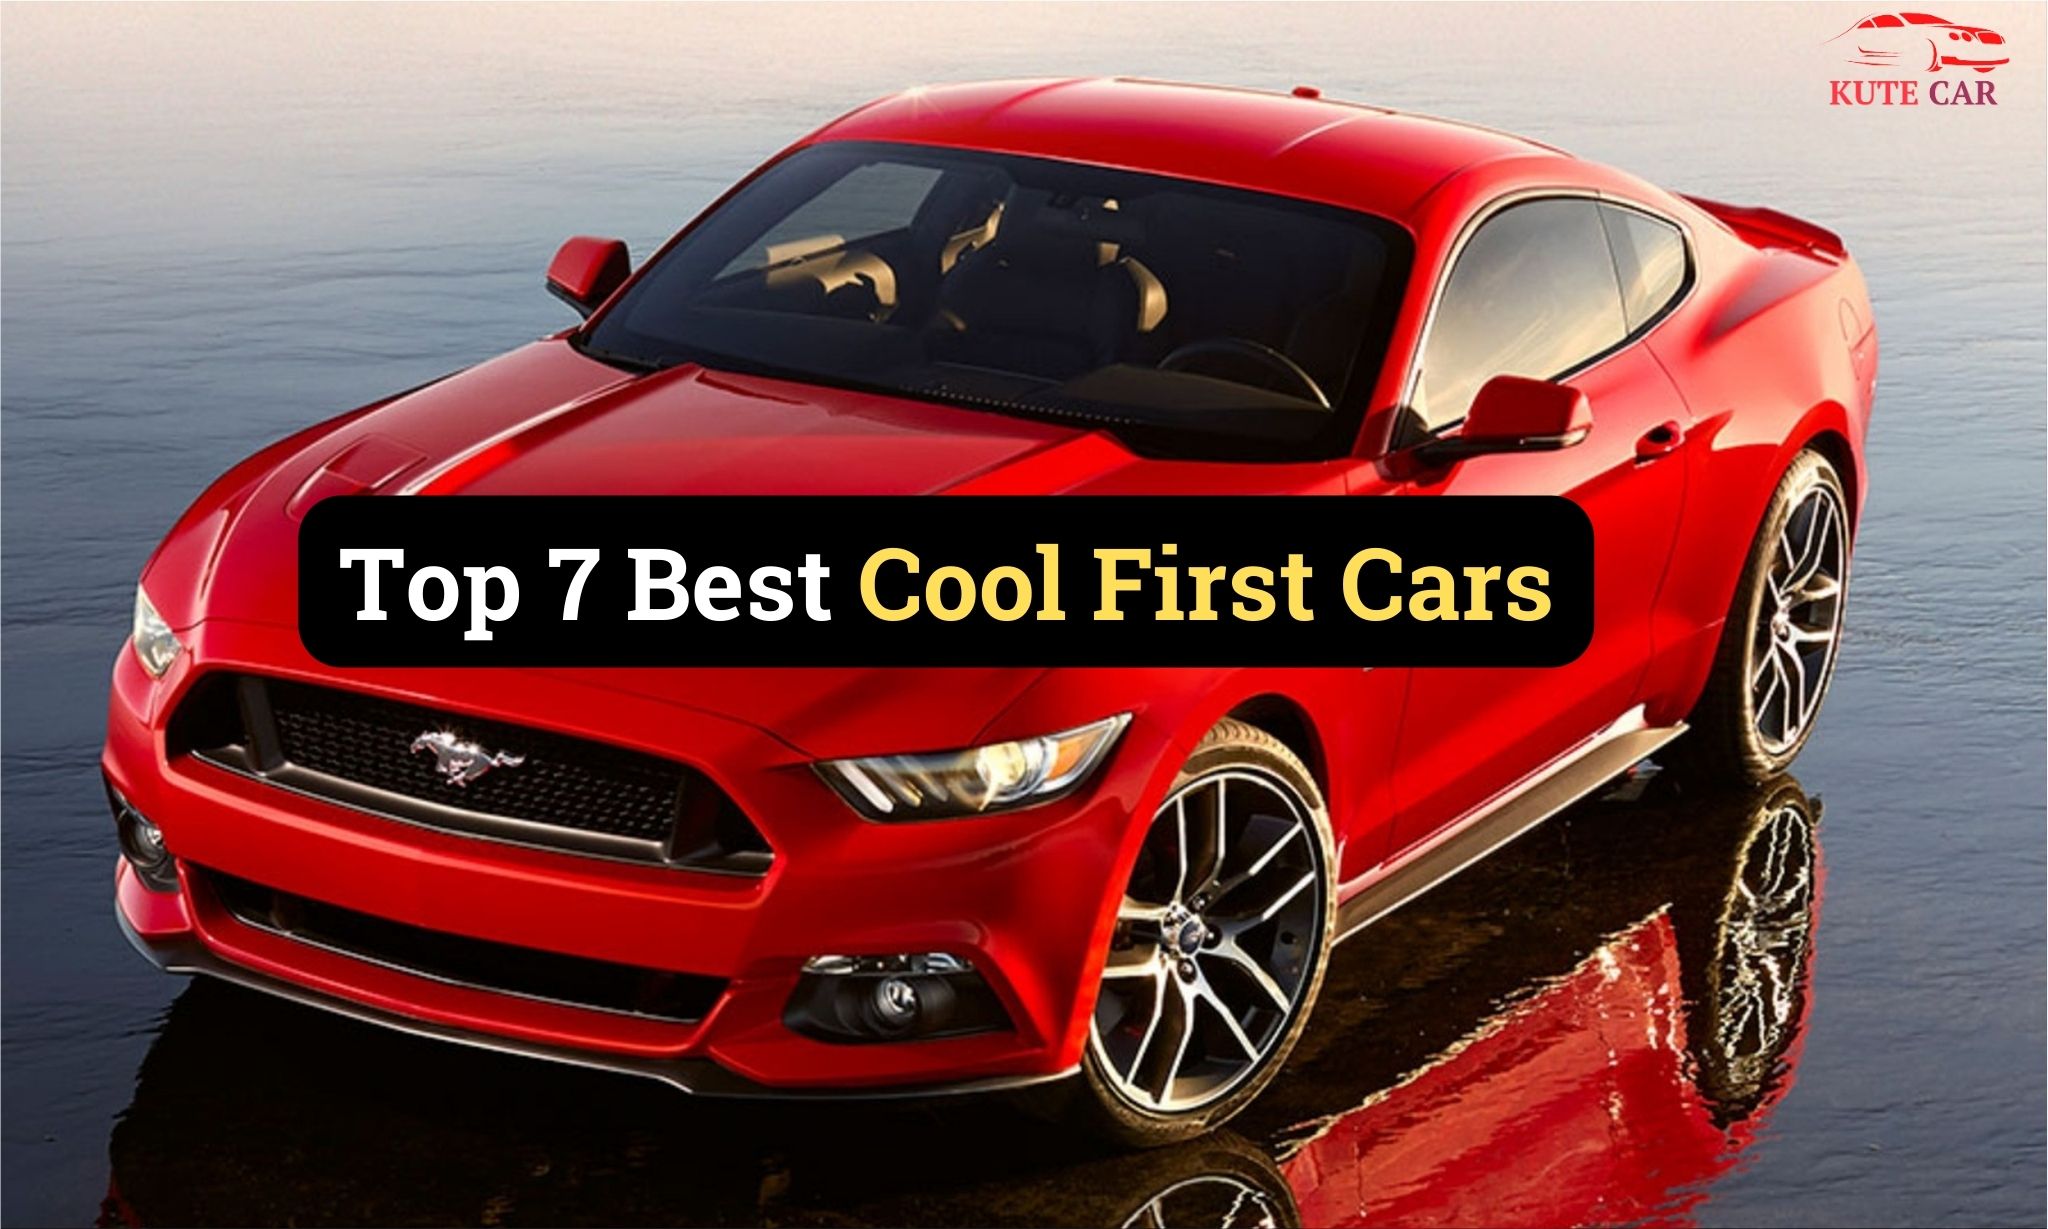 Best Cool First Cars